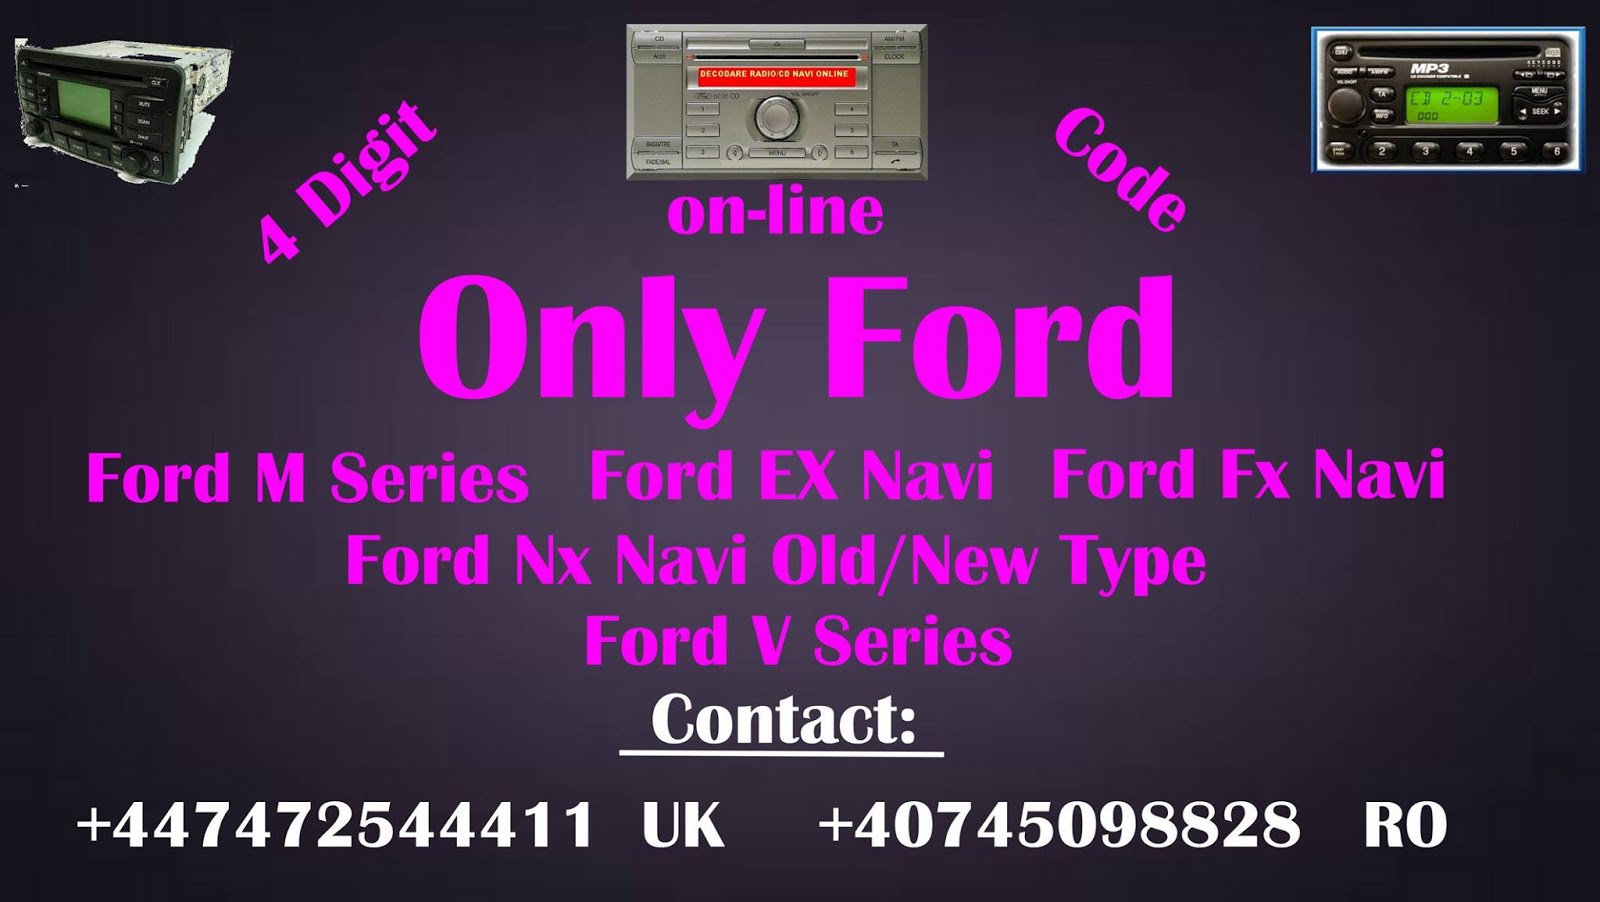 DECODING AUDIO CAR-ONLY FORD